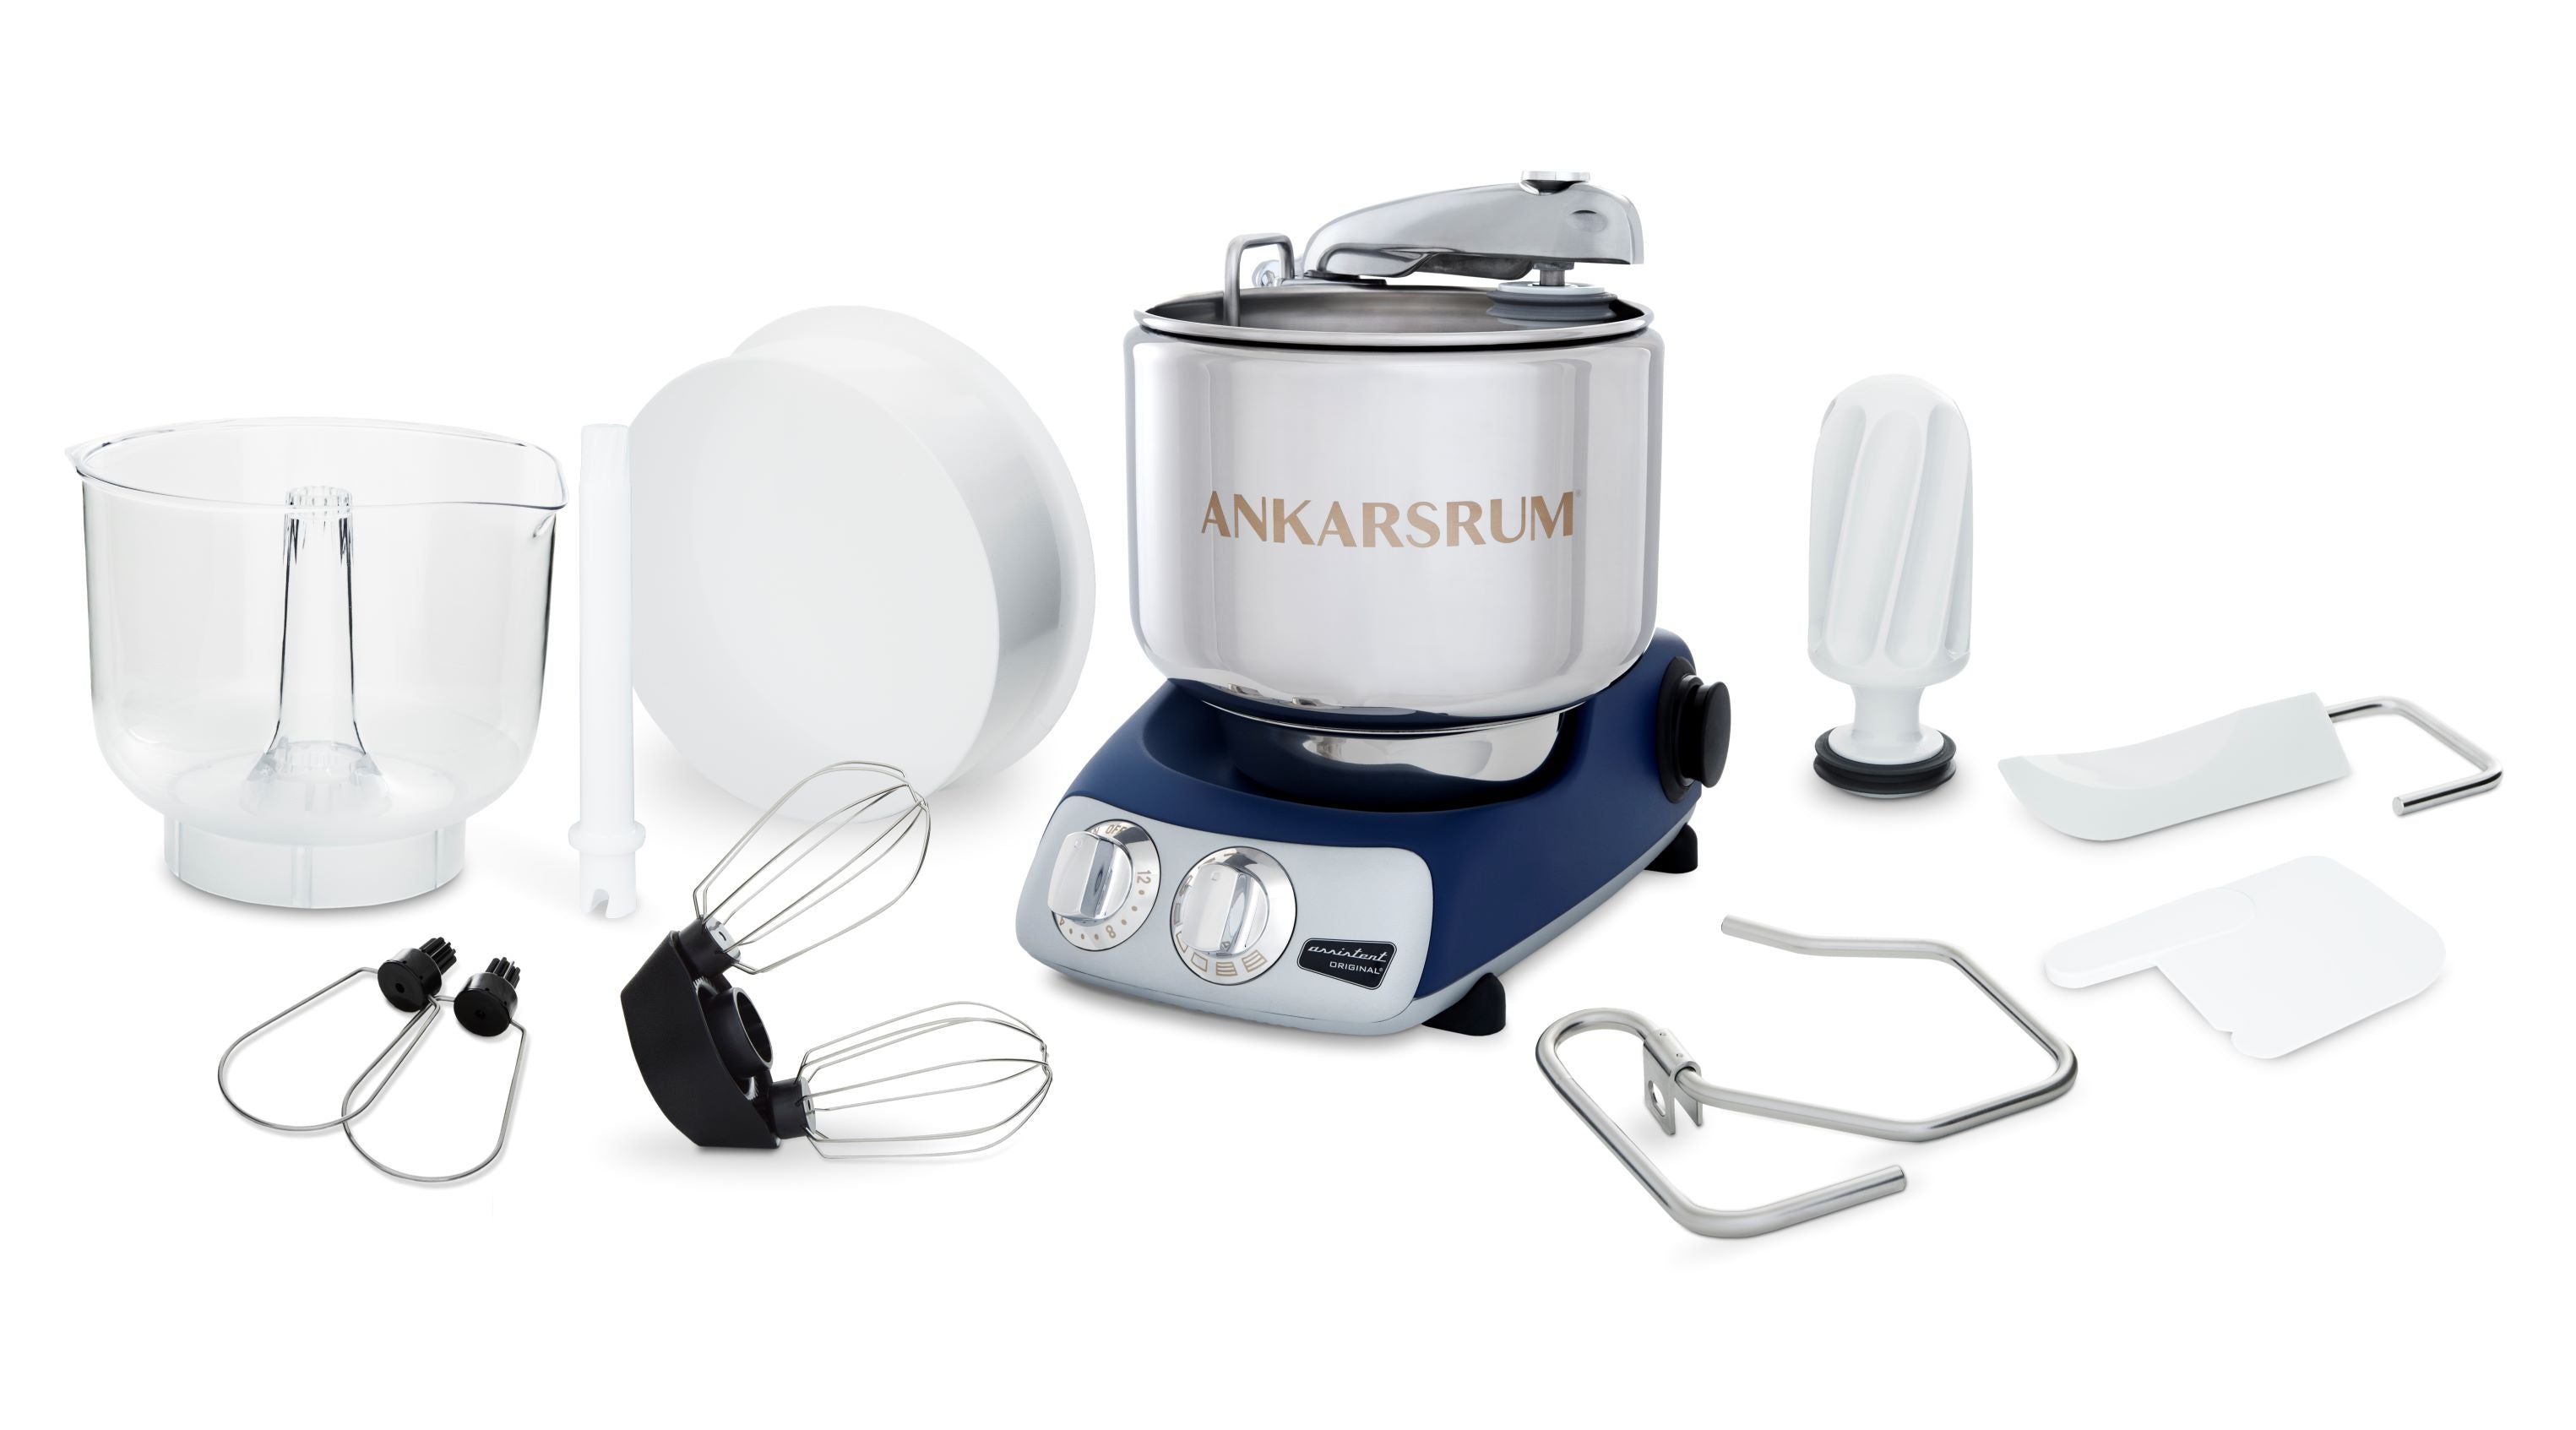 Ankarsrum + Attachments – Unsifted, Inc.